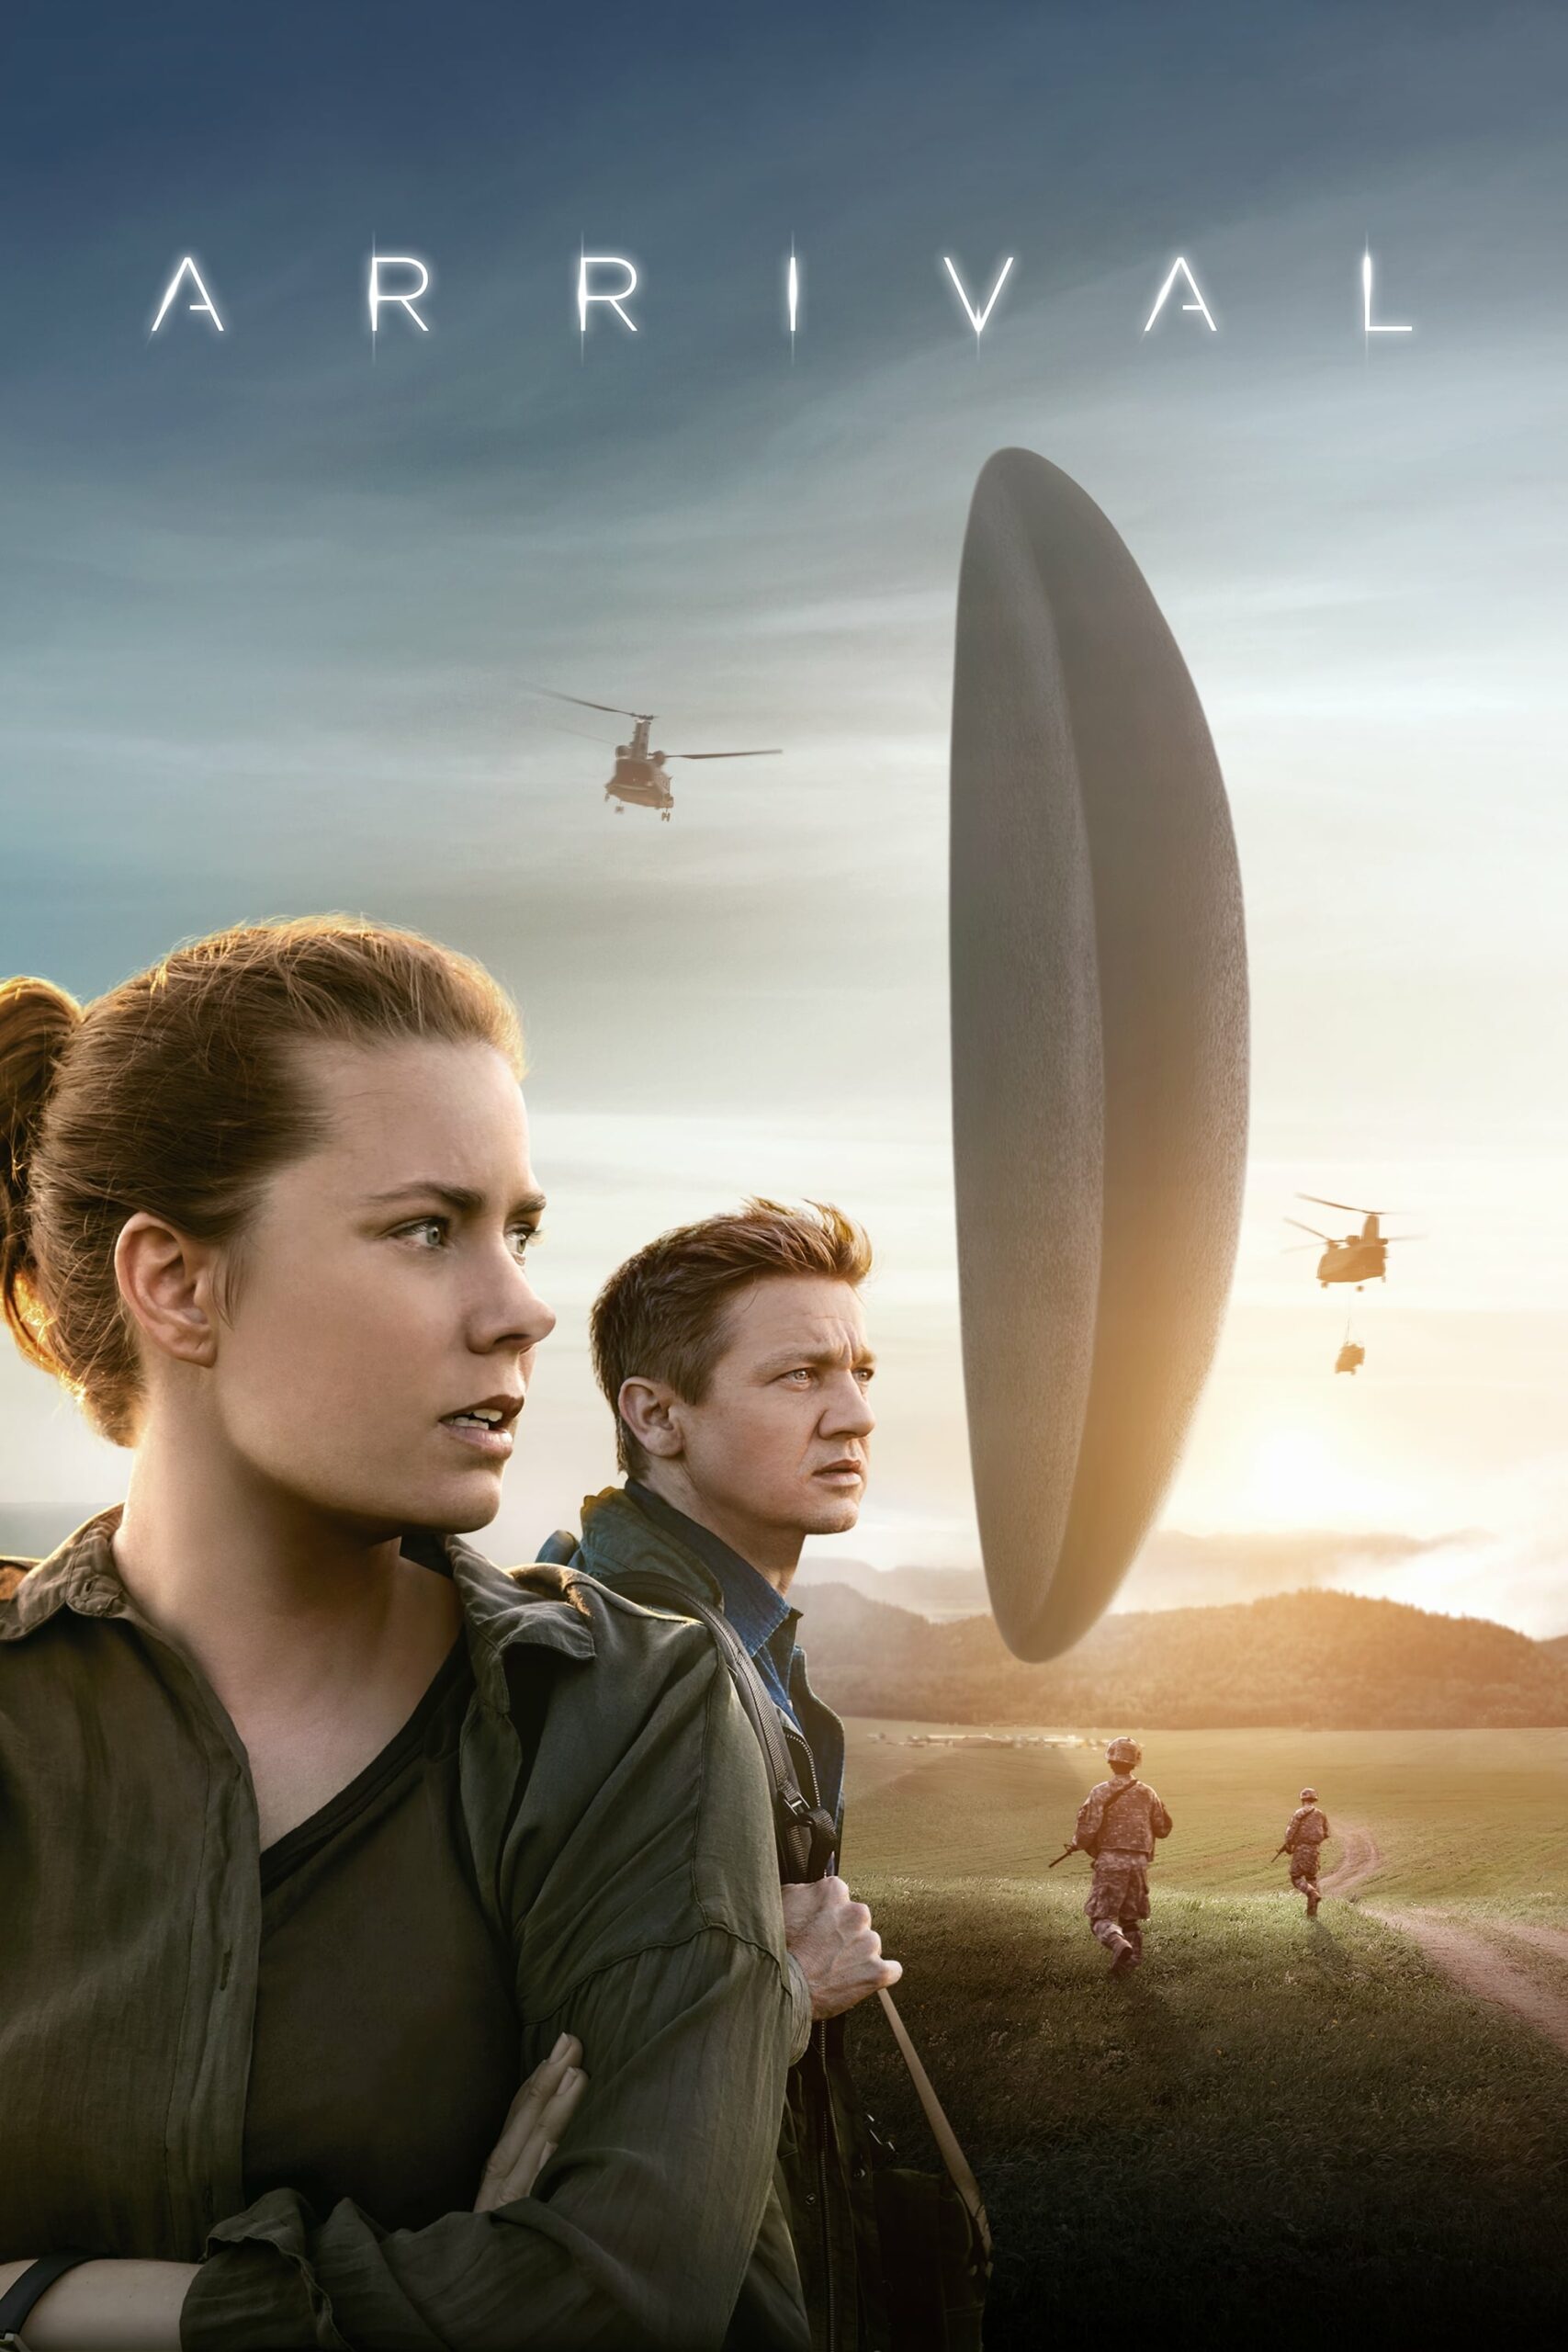 Arrival (12A)